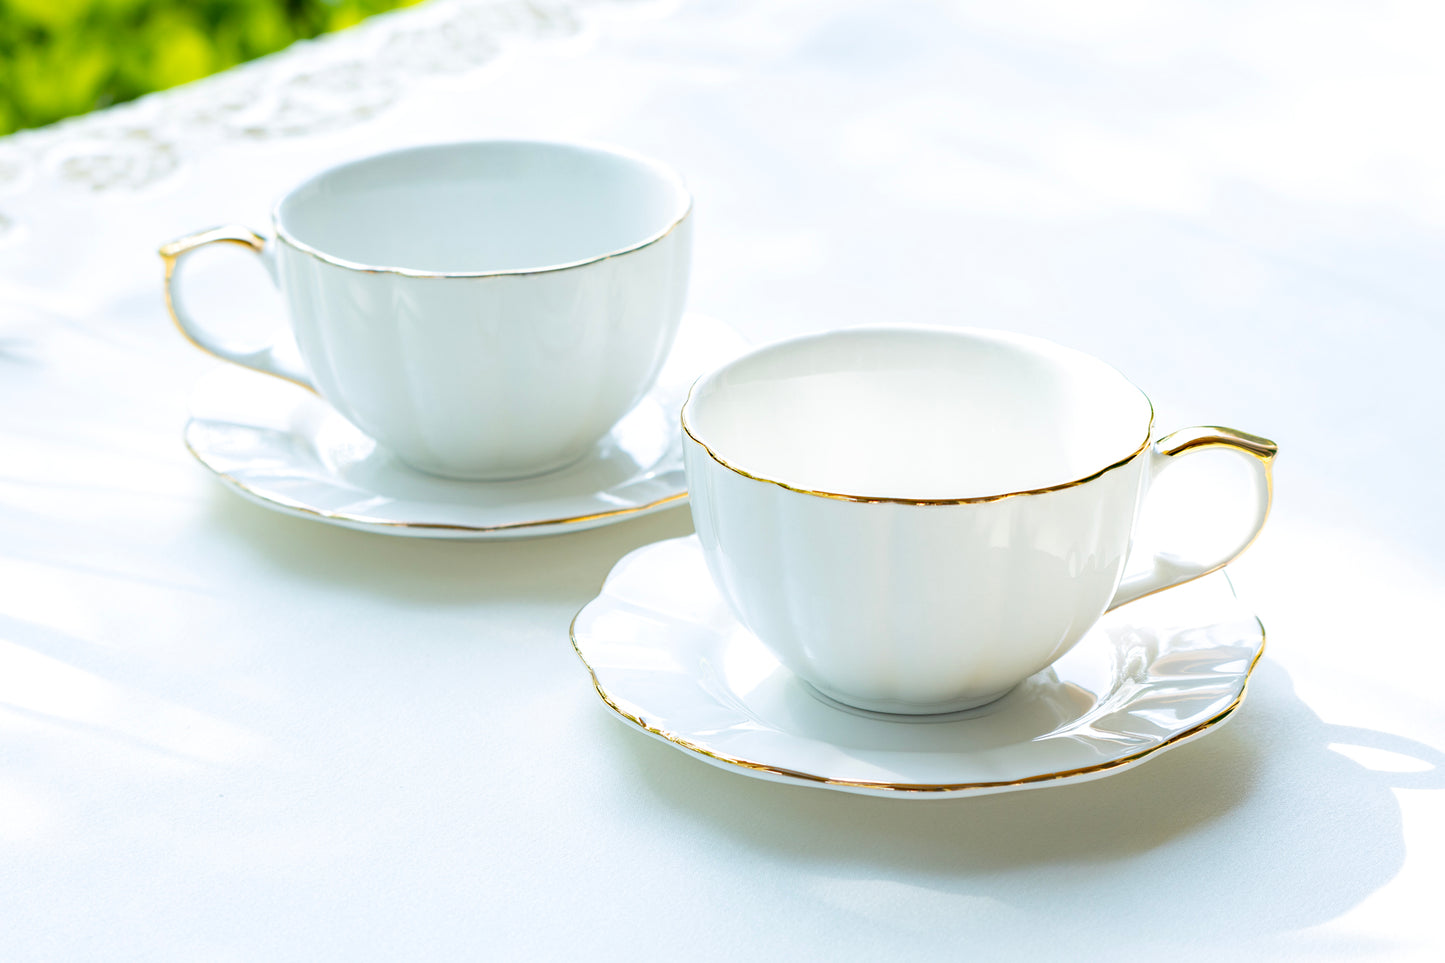 Grace Teaware White Gold Scallop Fine Porcelain Tea / Latte Cup and Saucer set of 2